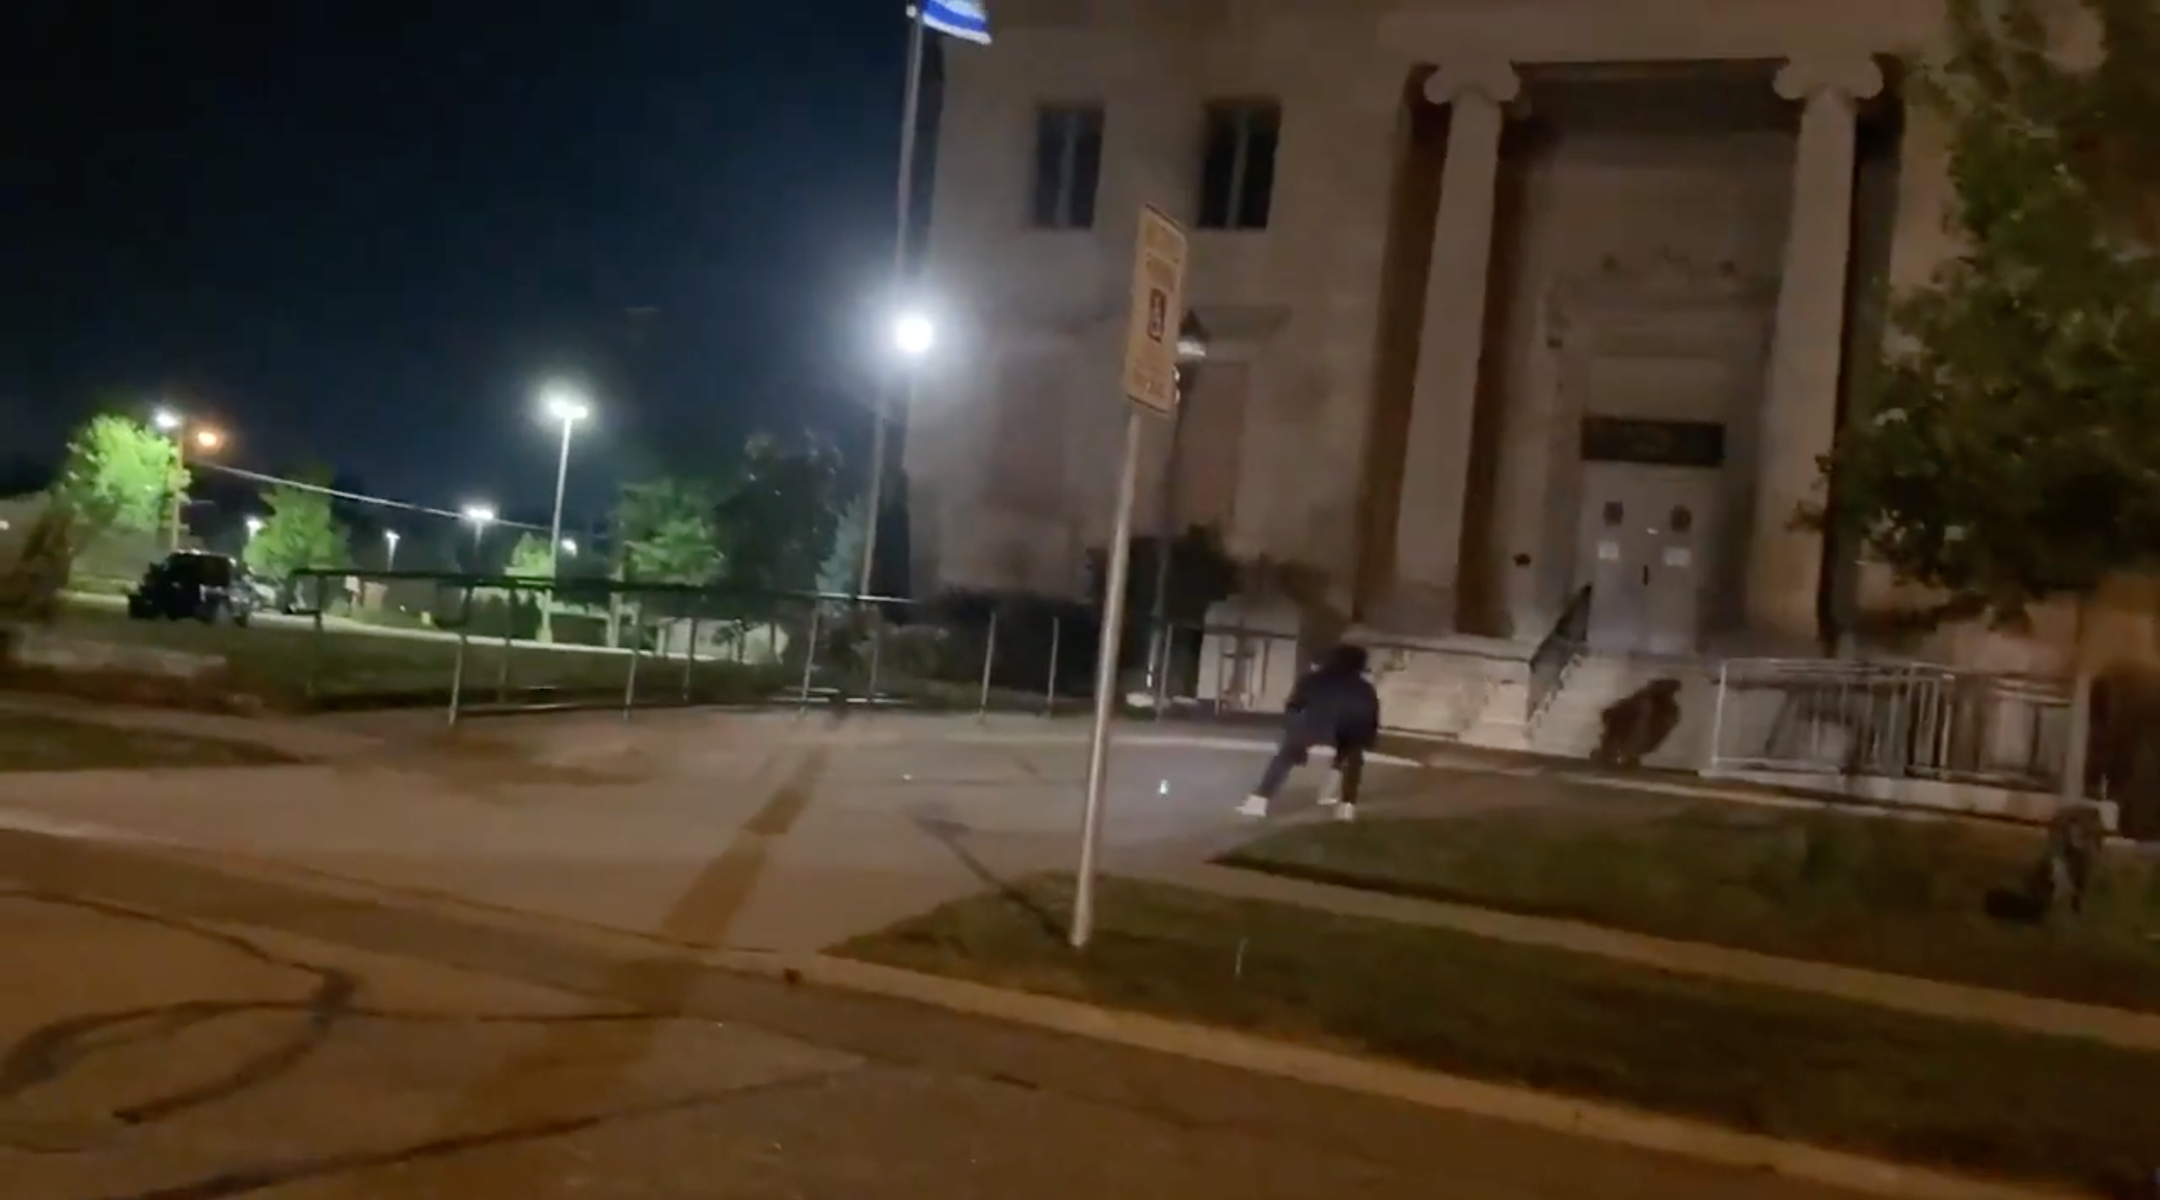 Someone sprays graffiti reading 'Free Palestine' on the driveway of Beth Hillel Temple in Kenosha, Wisconsin on Wednesday, Aug. 26. (Screenshot from YouTube)